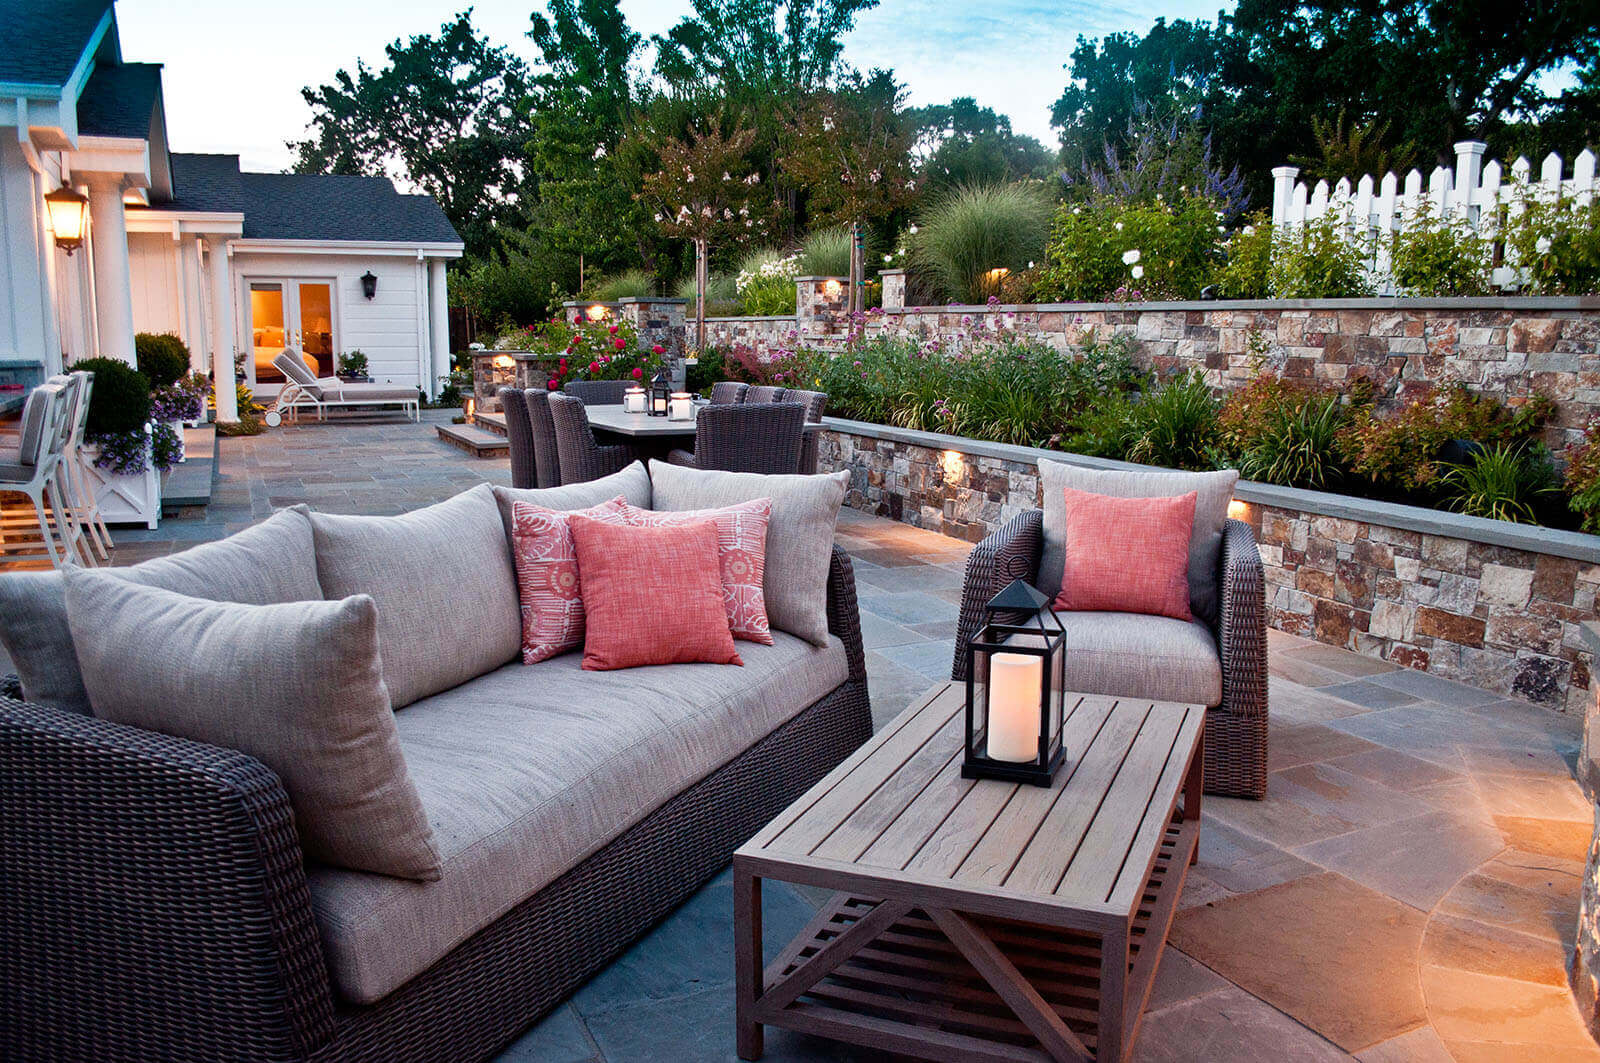 Outdoor patio with lighting on lower walls, fixtures on posts, and lights near stairs, candles are used as well